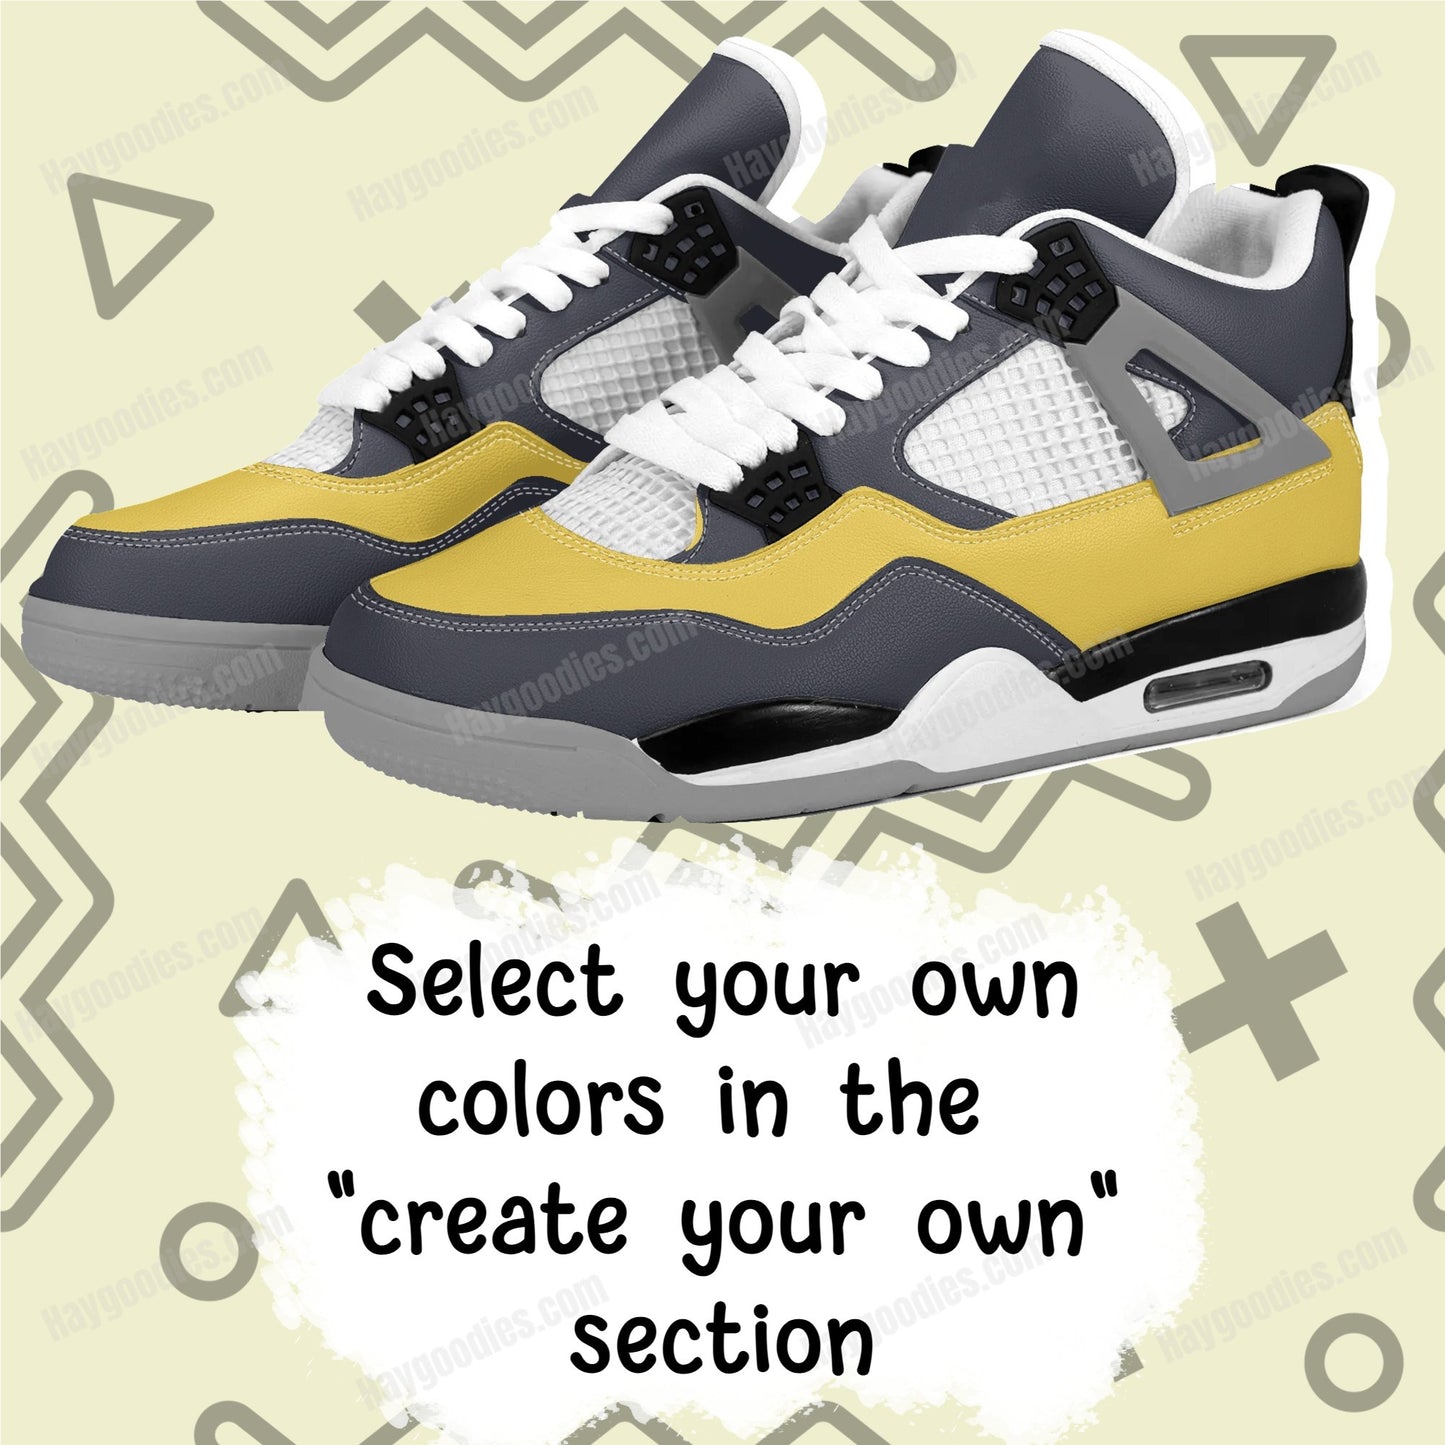 Dark Grey and Yellow Color Mix Retro Low Top J4 Style Sneakers